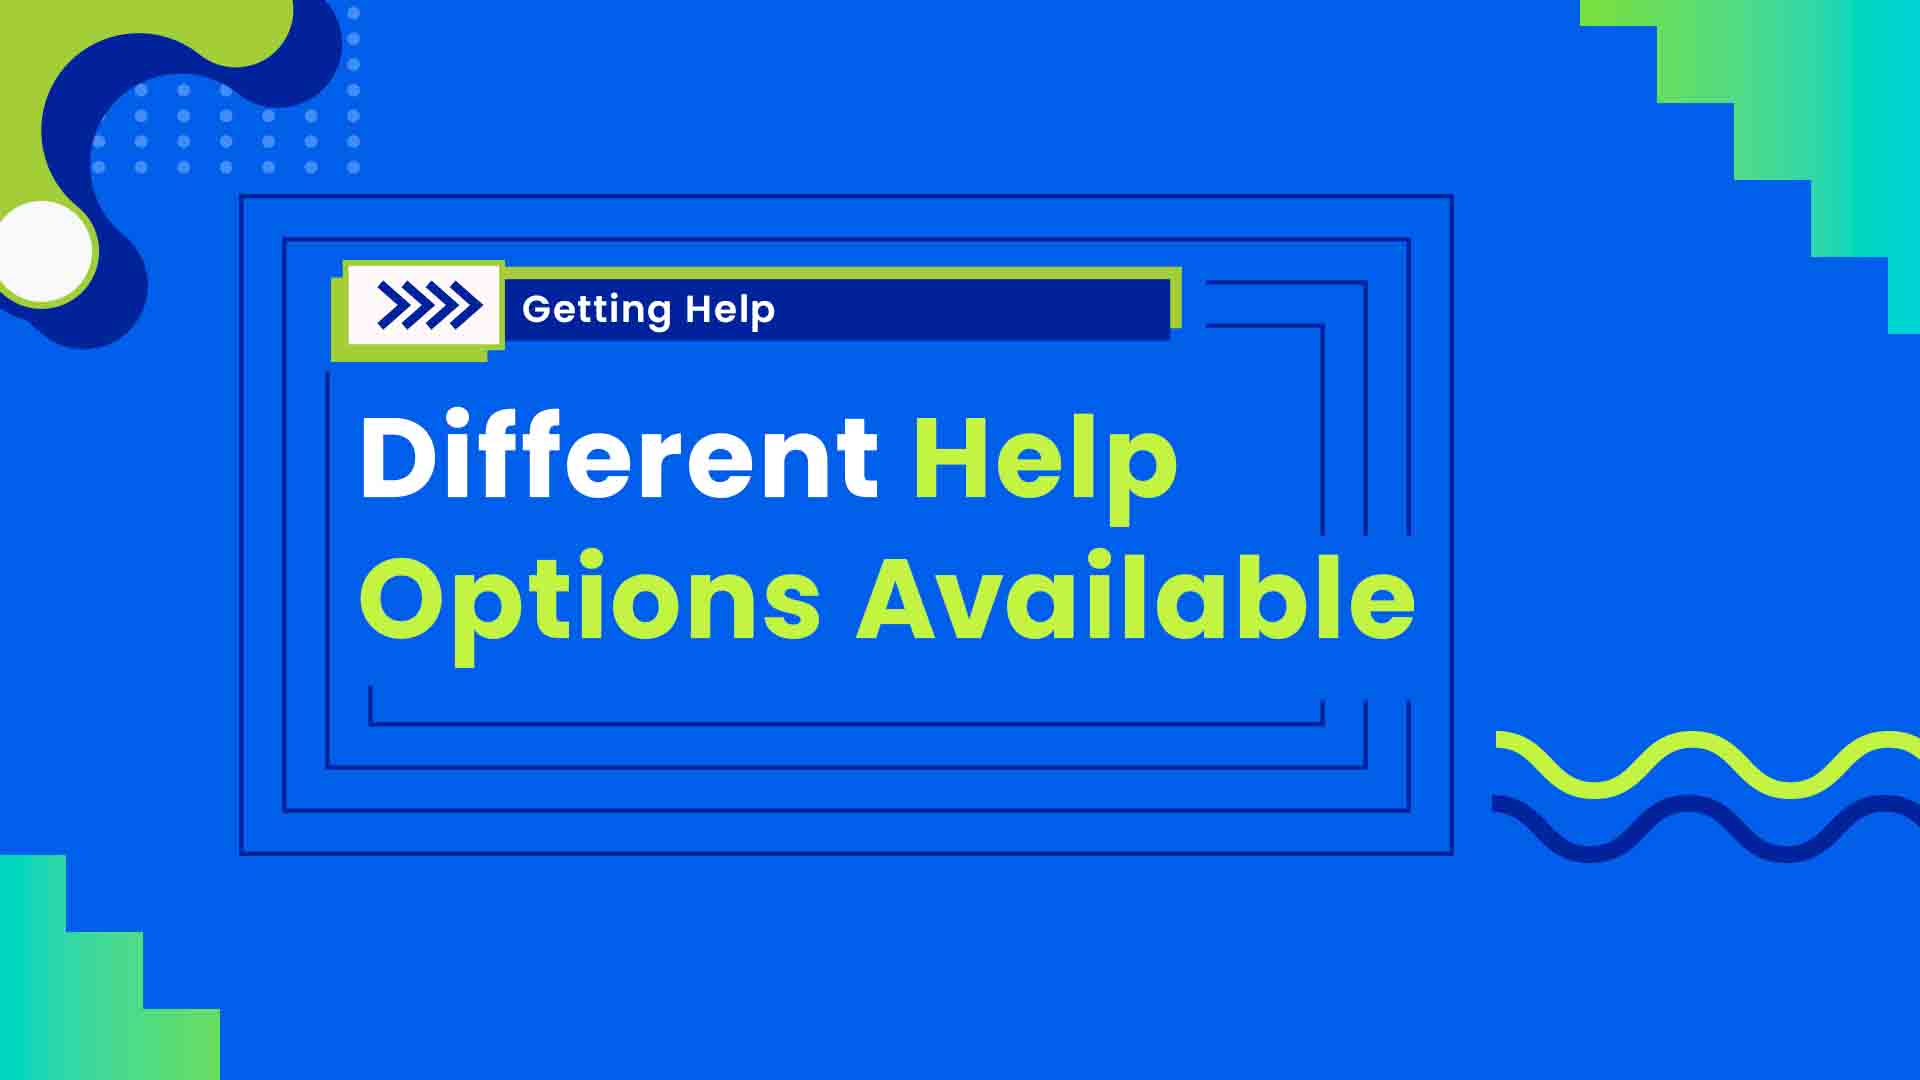 1. Different Help Options